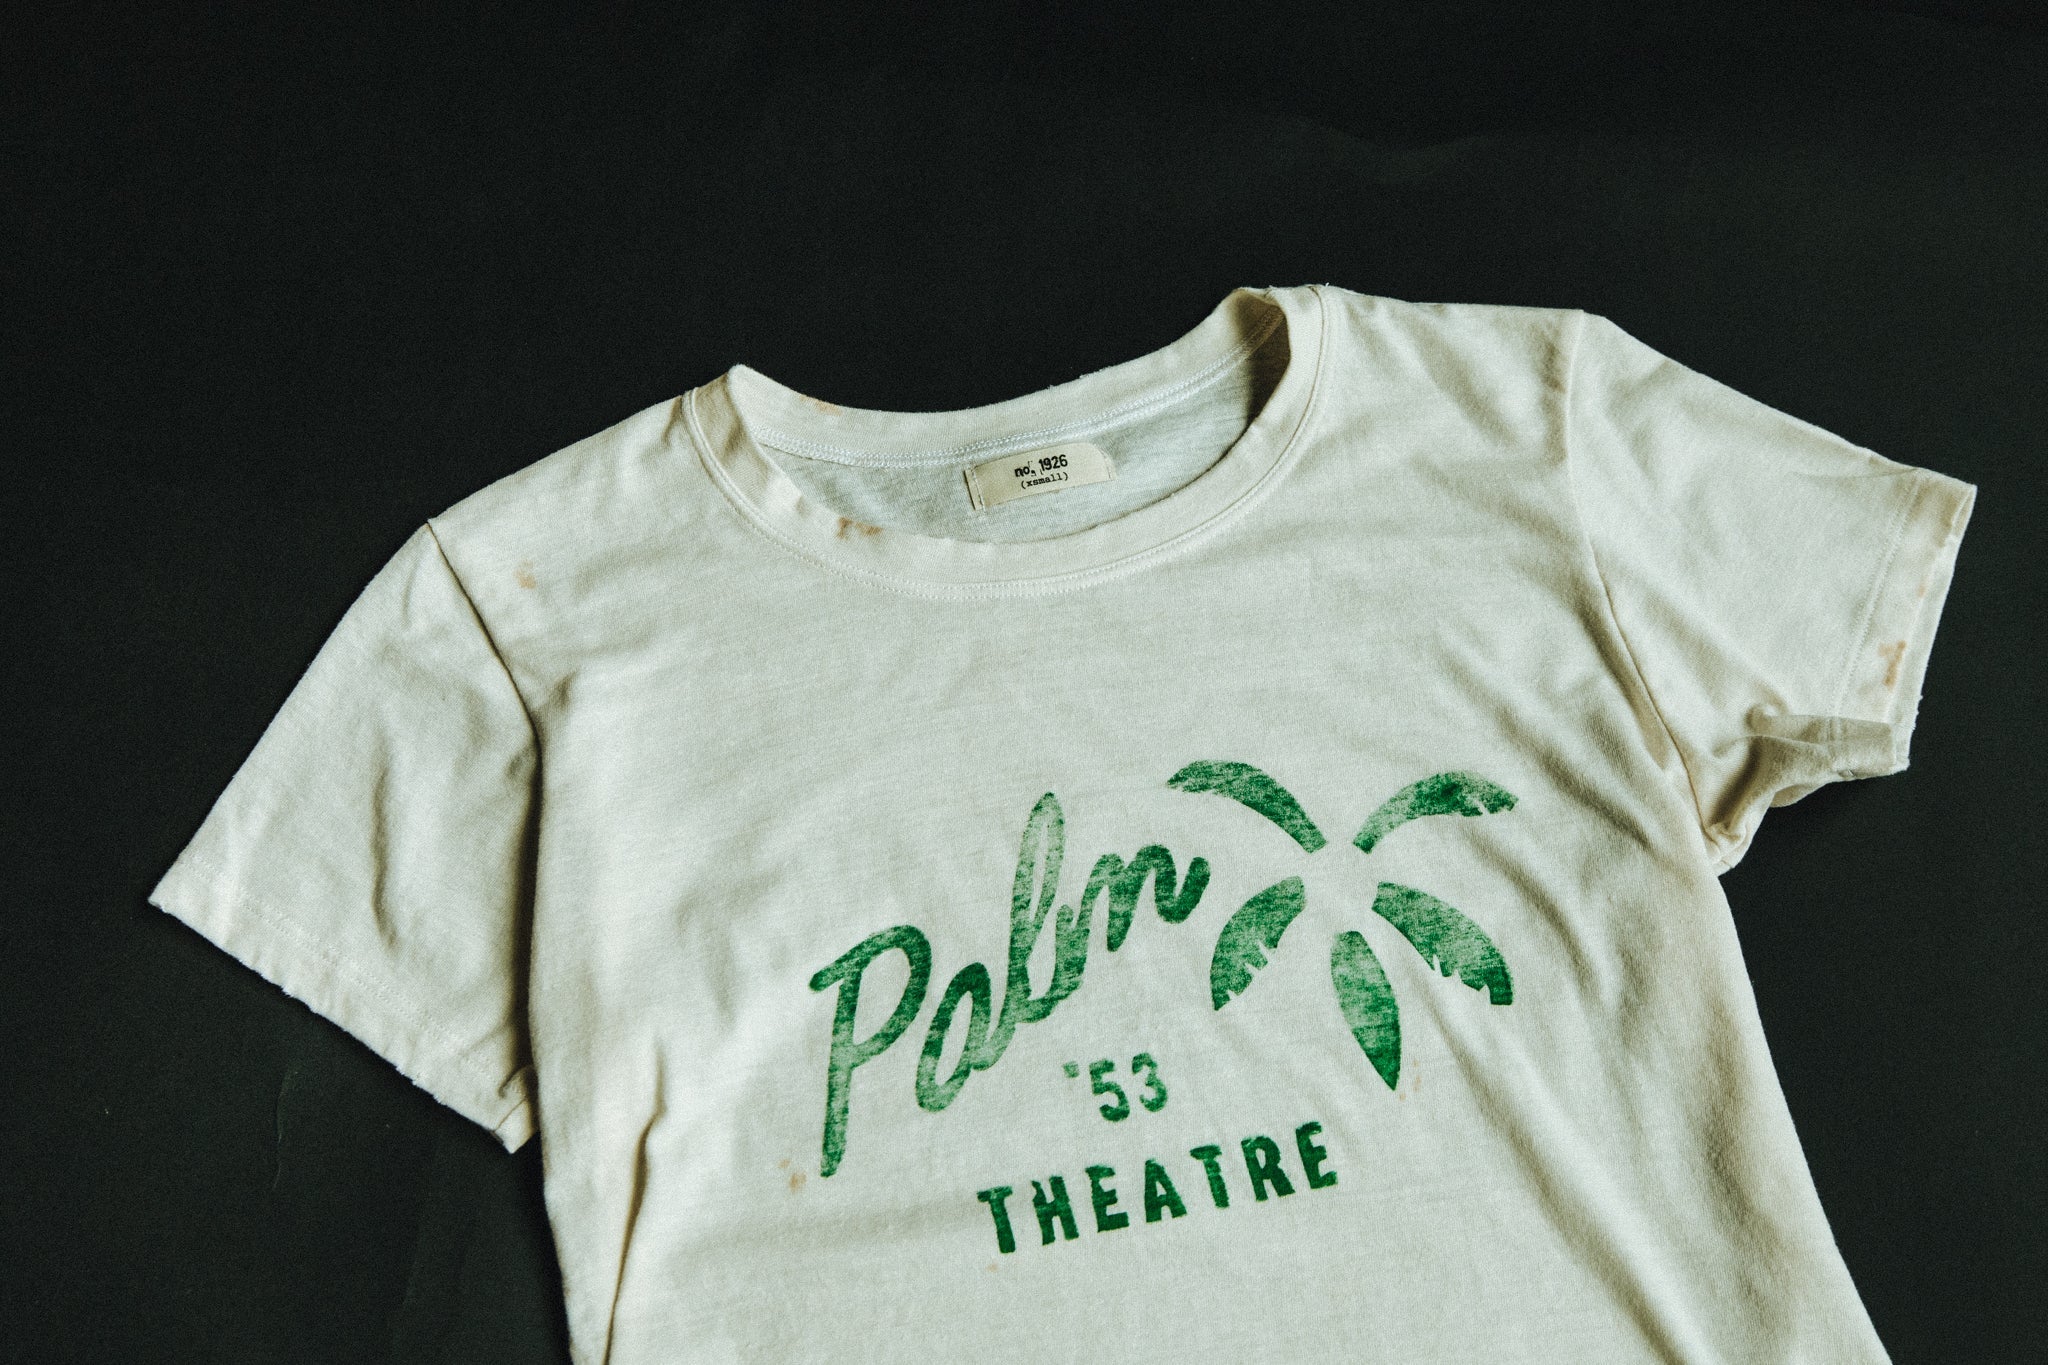 the "palm theatre" tee Tee Number 1926   